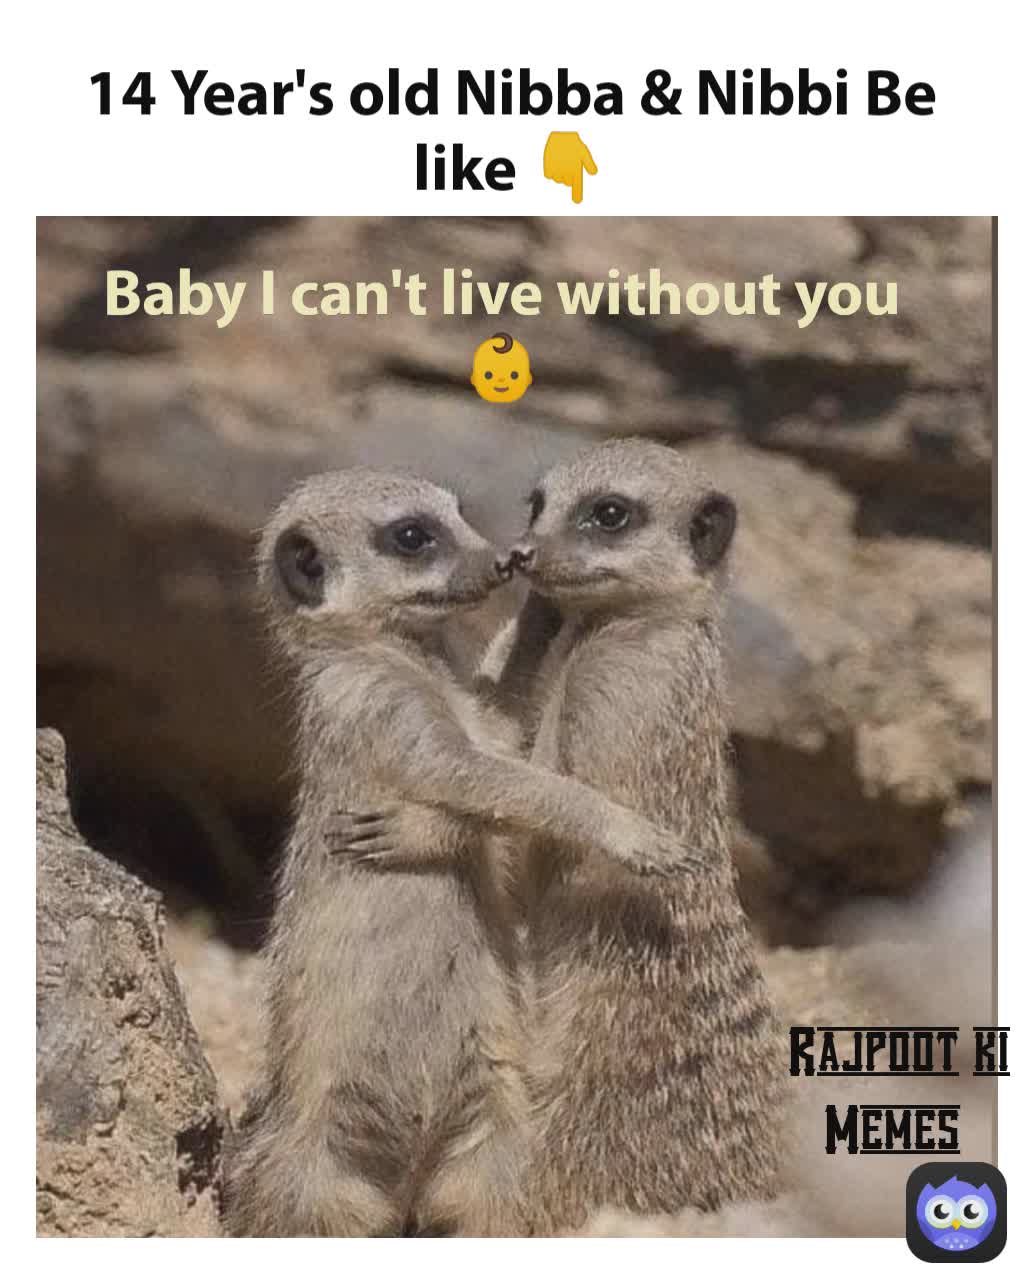 Baby I can't live without you  Rajpoot ki Memes 14 Year's old ...